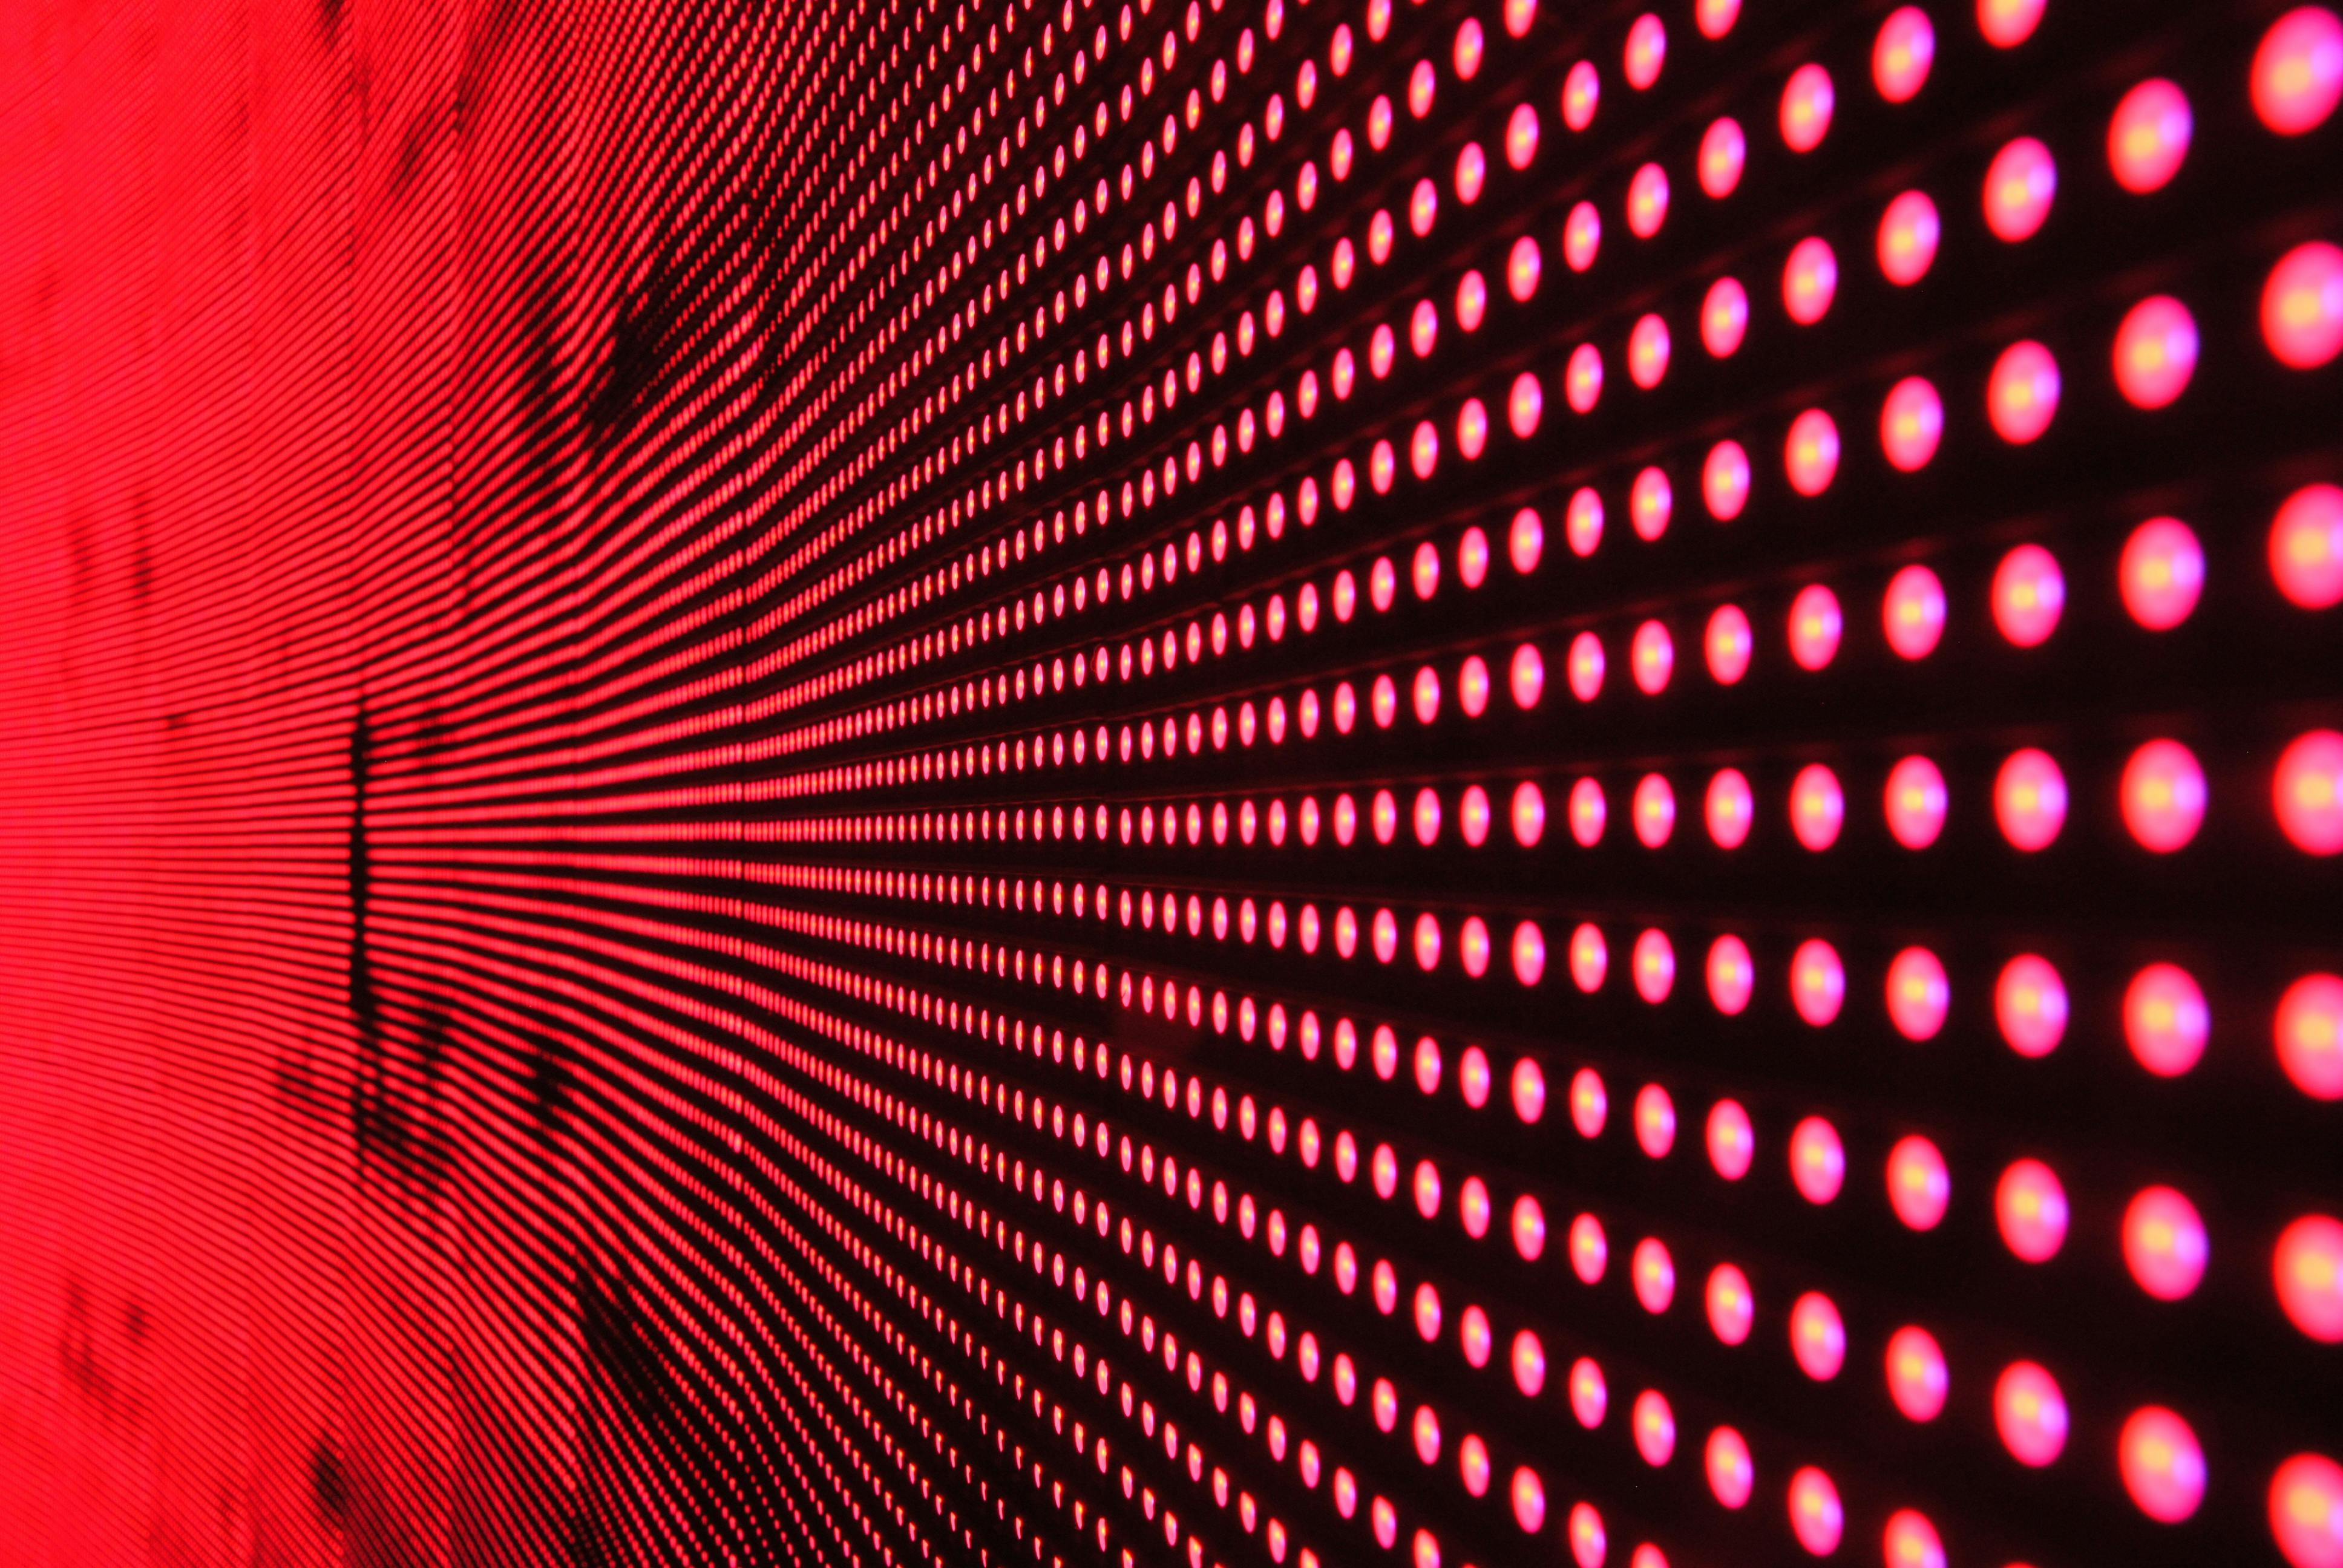 Red Neon Background Images  Free Download on Freepik